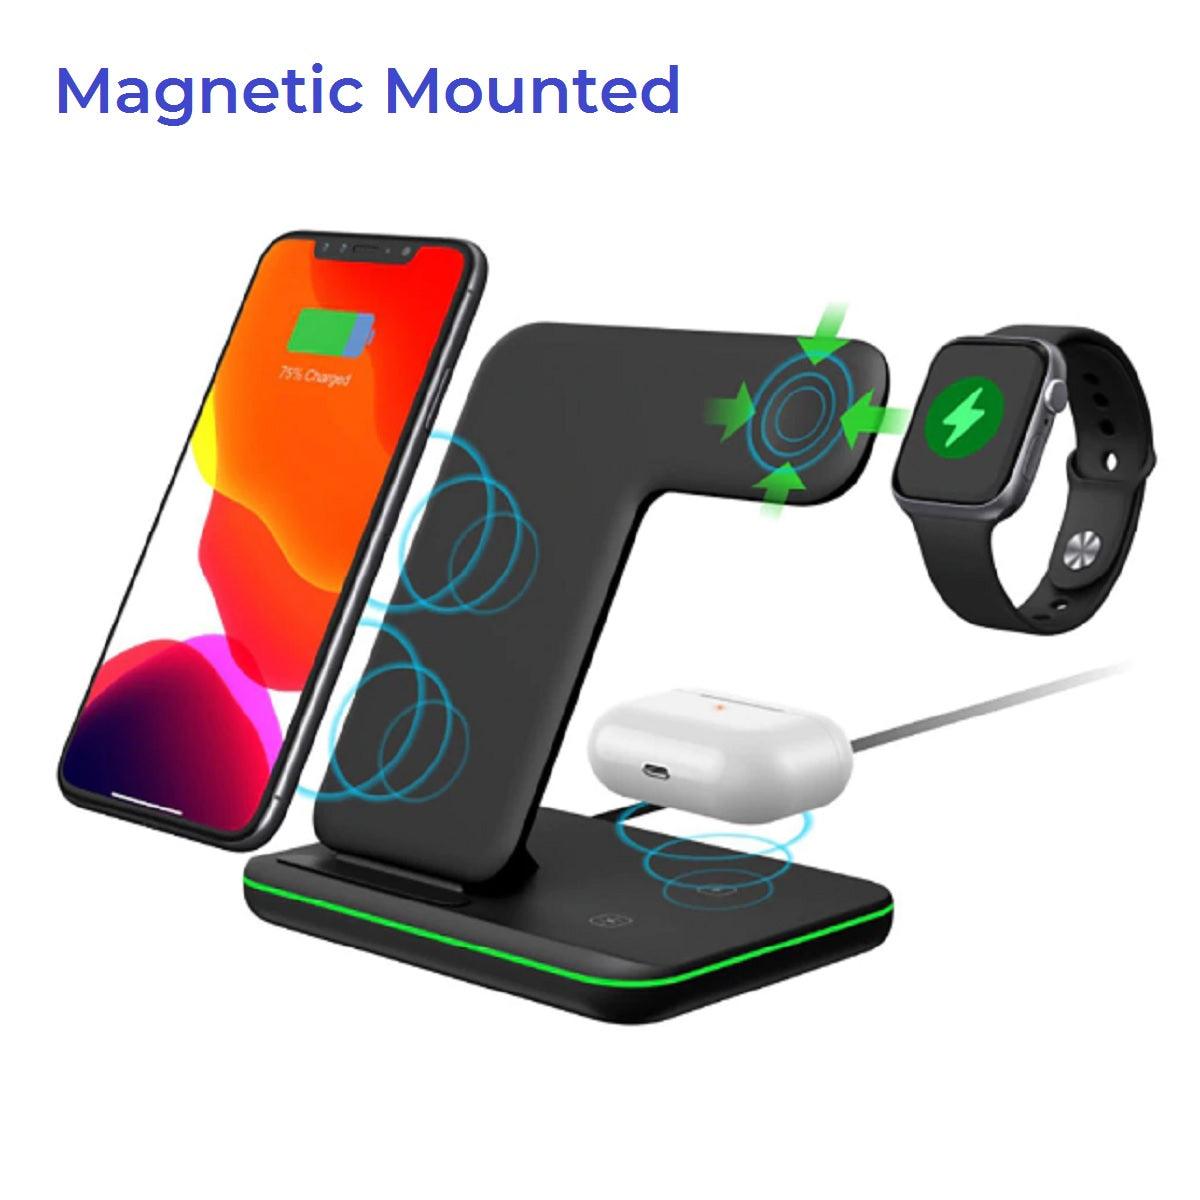 Elegant and Concise Wireless Charging Module - For Apple Devices - dealskart.com.au